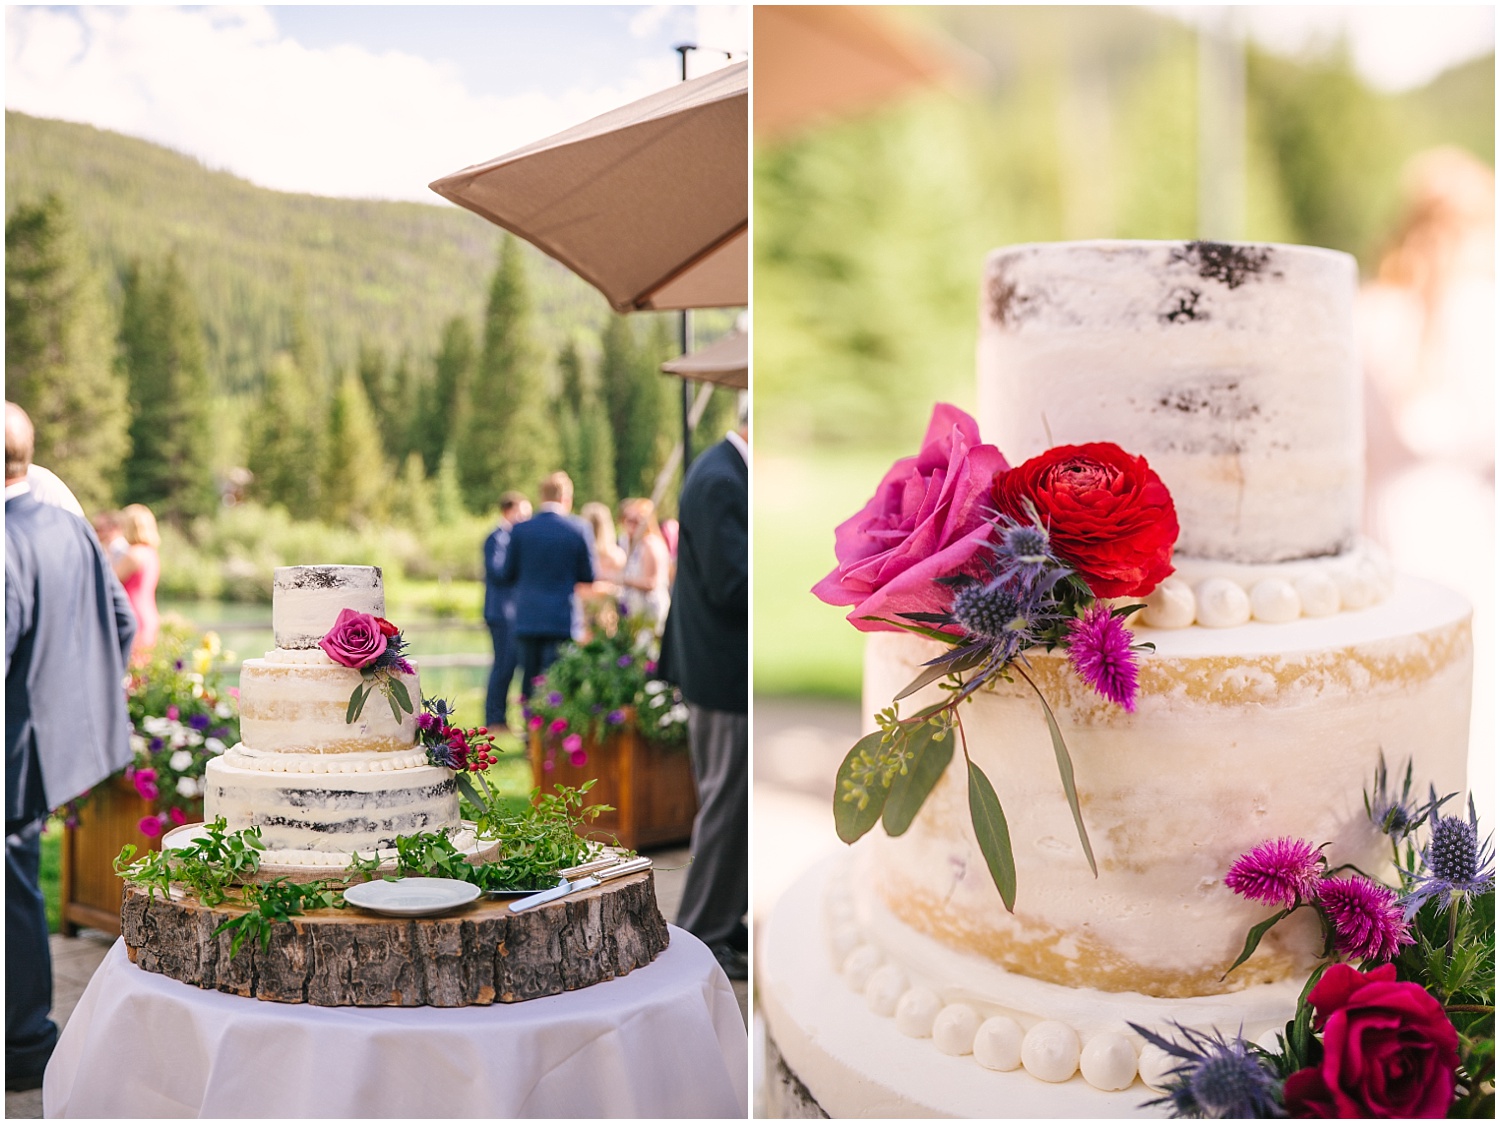 Half-naked white wedding cake decorated with bright pink florals at Ski Tip Lodge wedding in Keystone Colorado